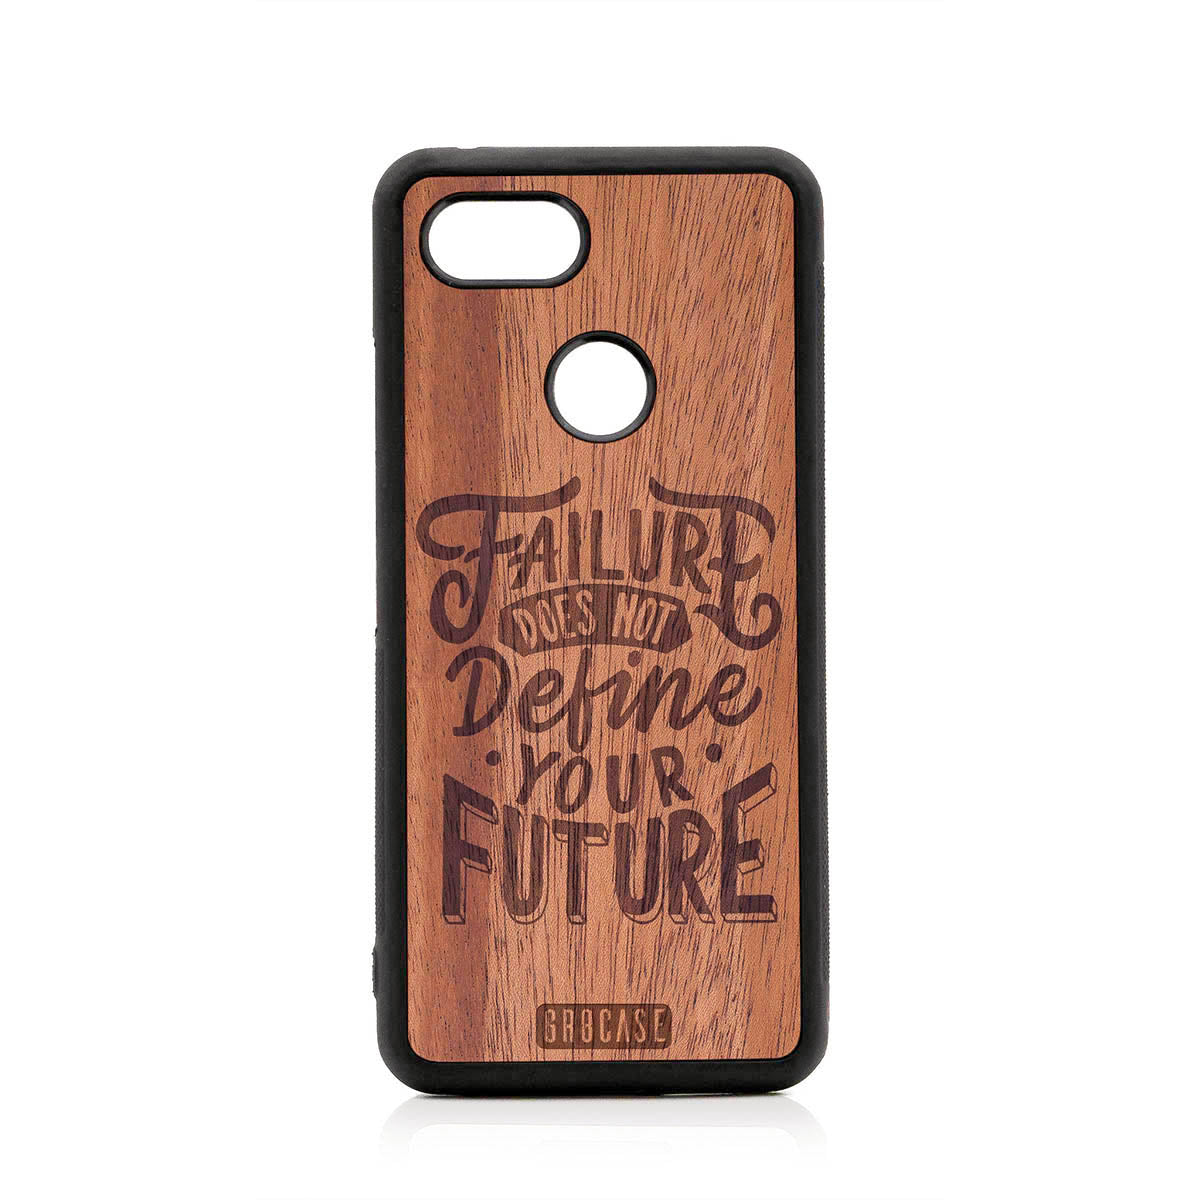 Failure Does Not Define You Future Design Wood Case For Google Pixel 3 by GR8CASE